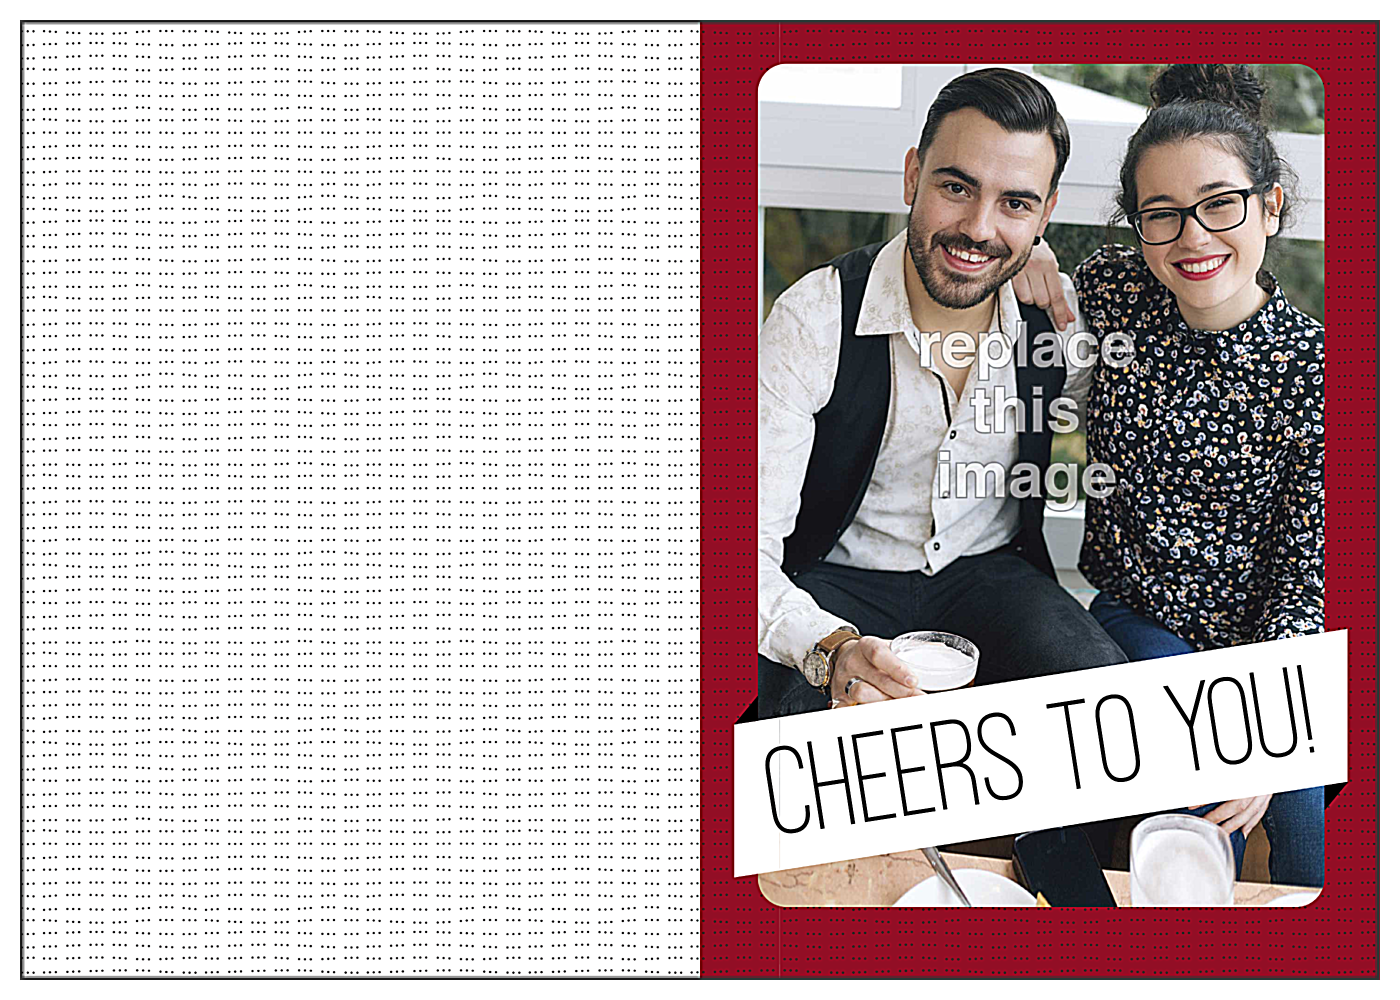 Cheers Banner front - Greeting Cards Maker